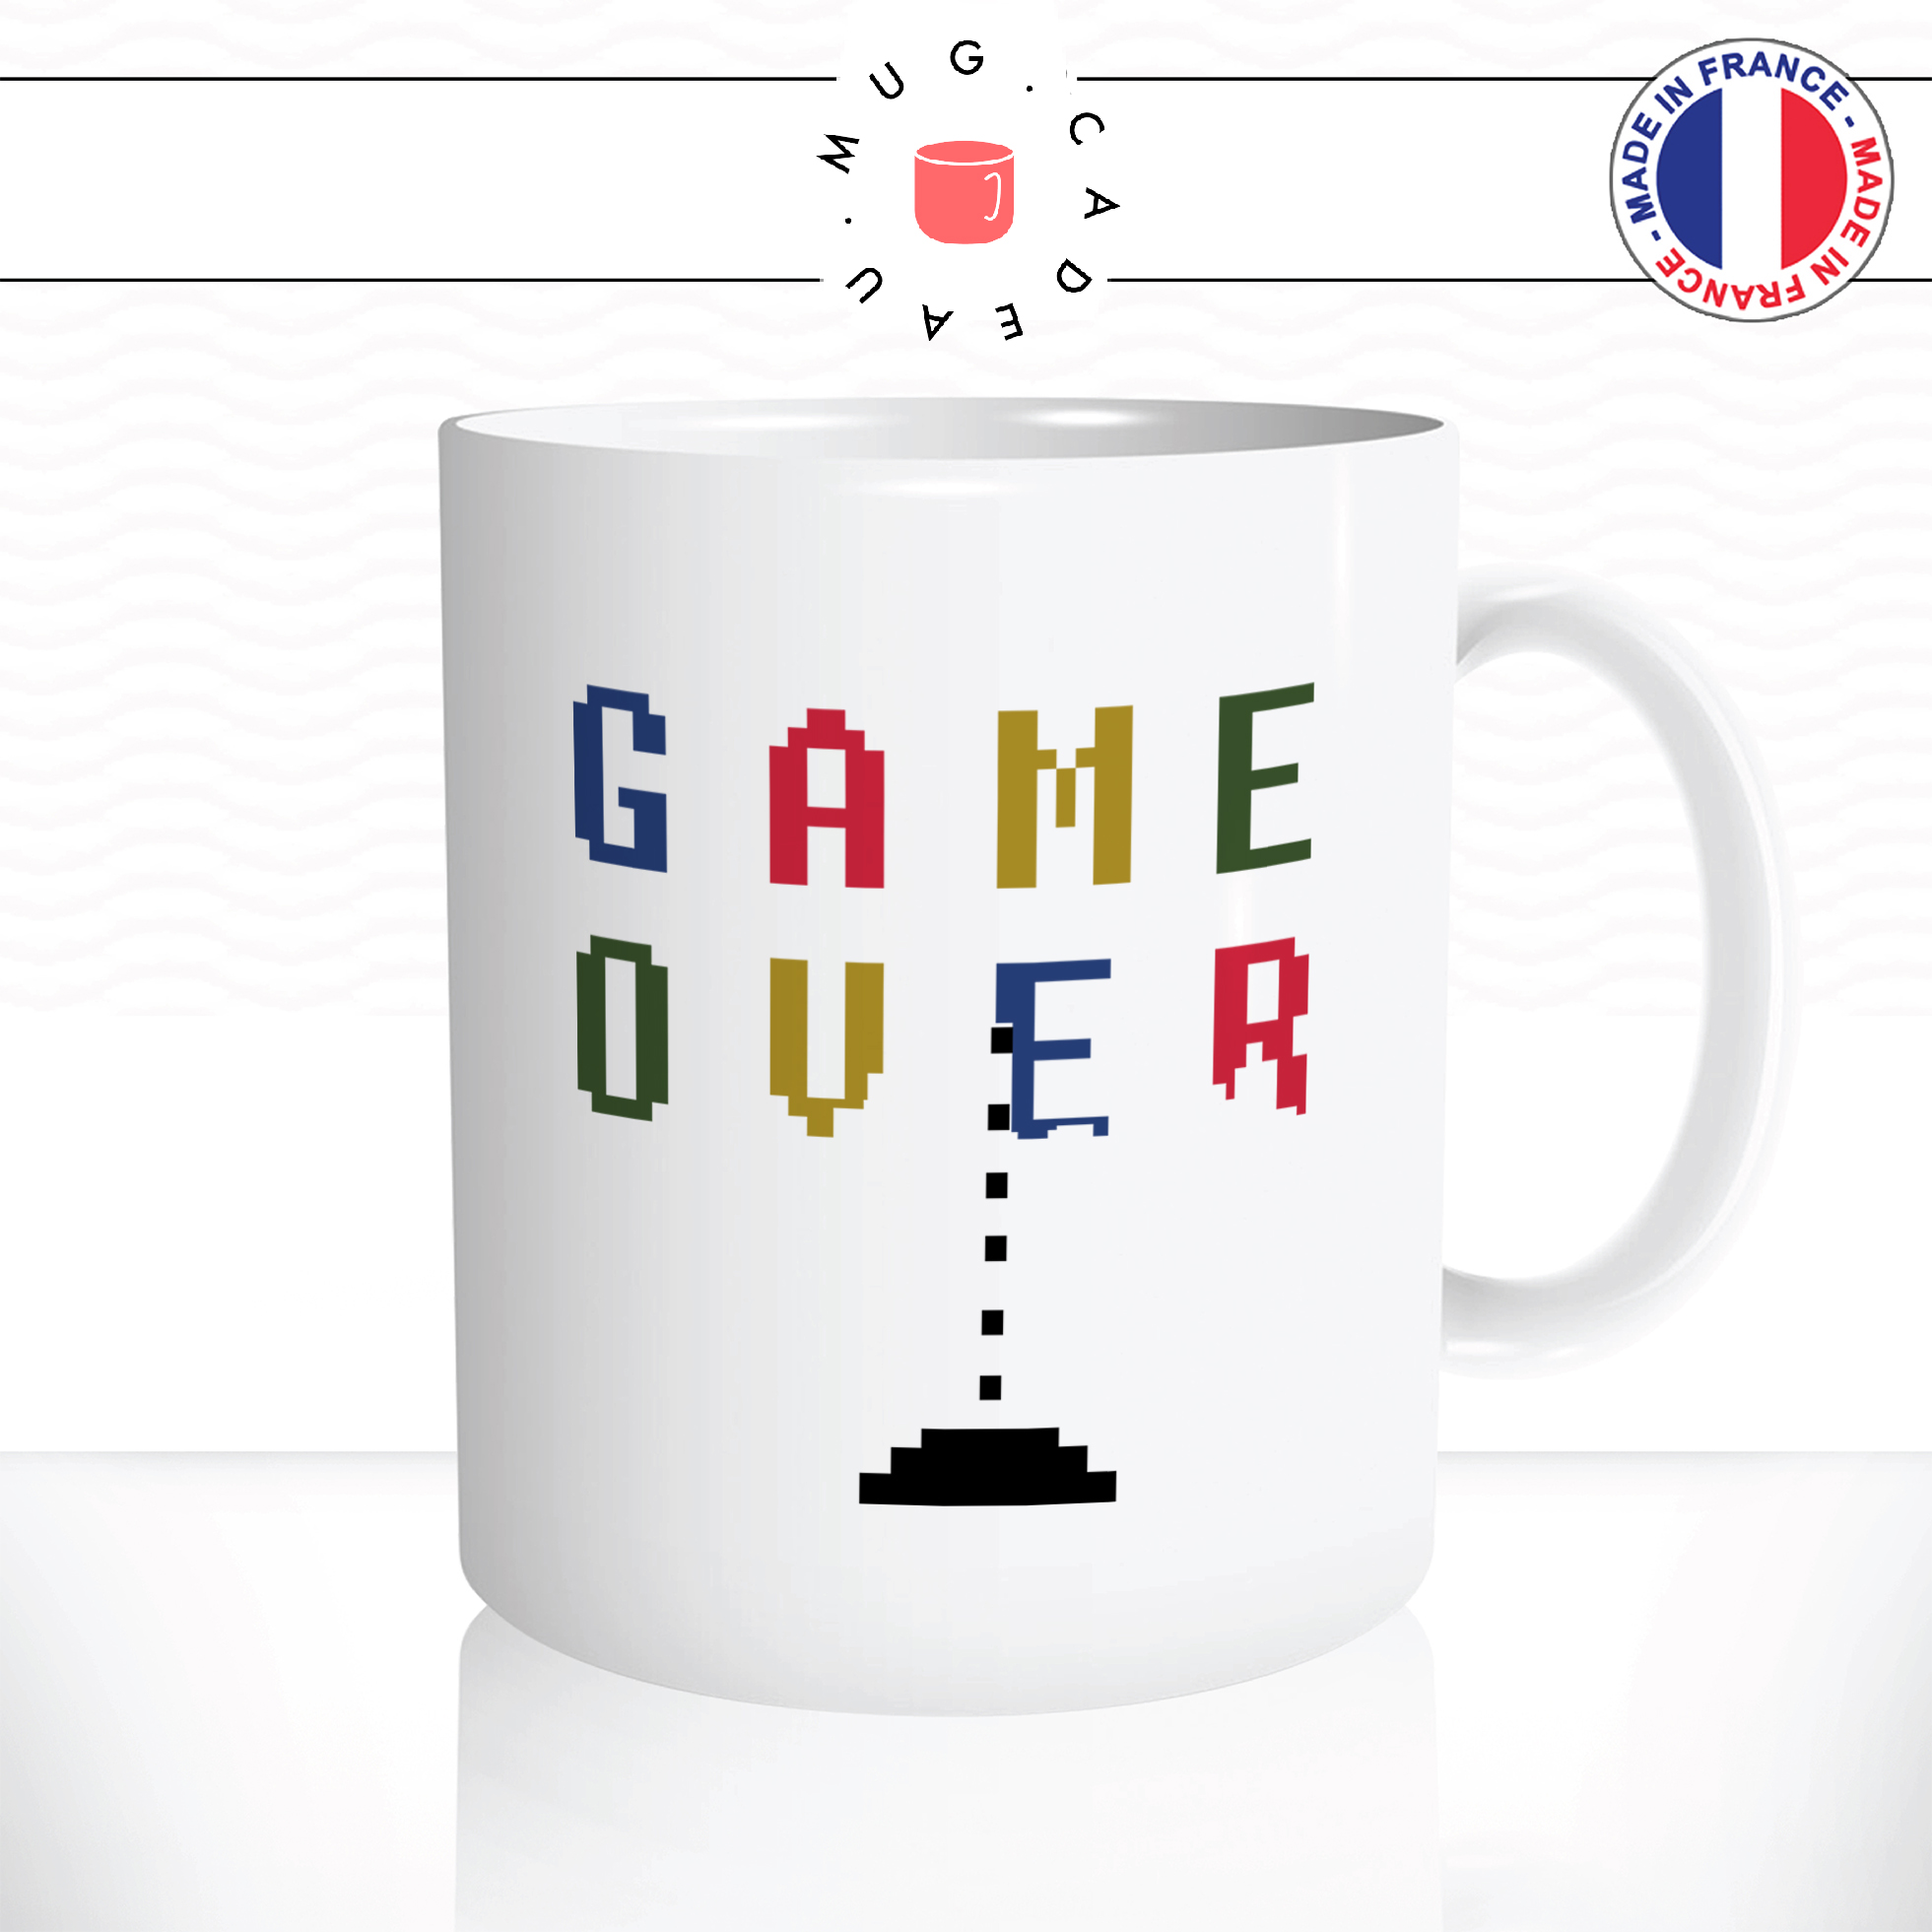 mug-tasse-ref21-jeux-video-game-over-attaque-pixels-couleurs-geek-cafe-the-mugs-tasses-personnalise-anse-droite